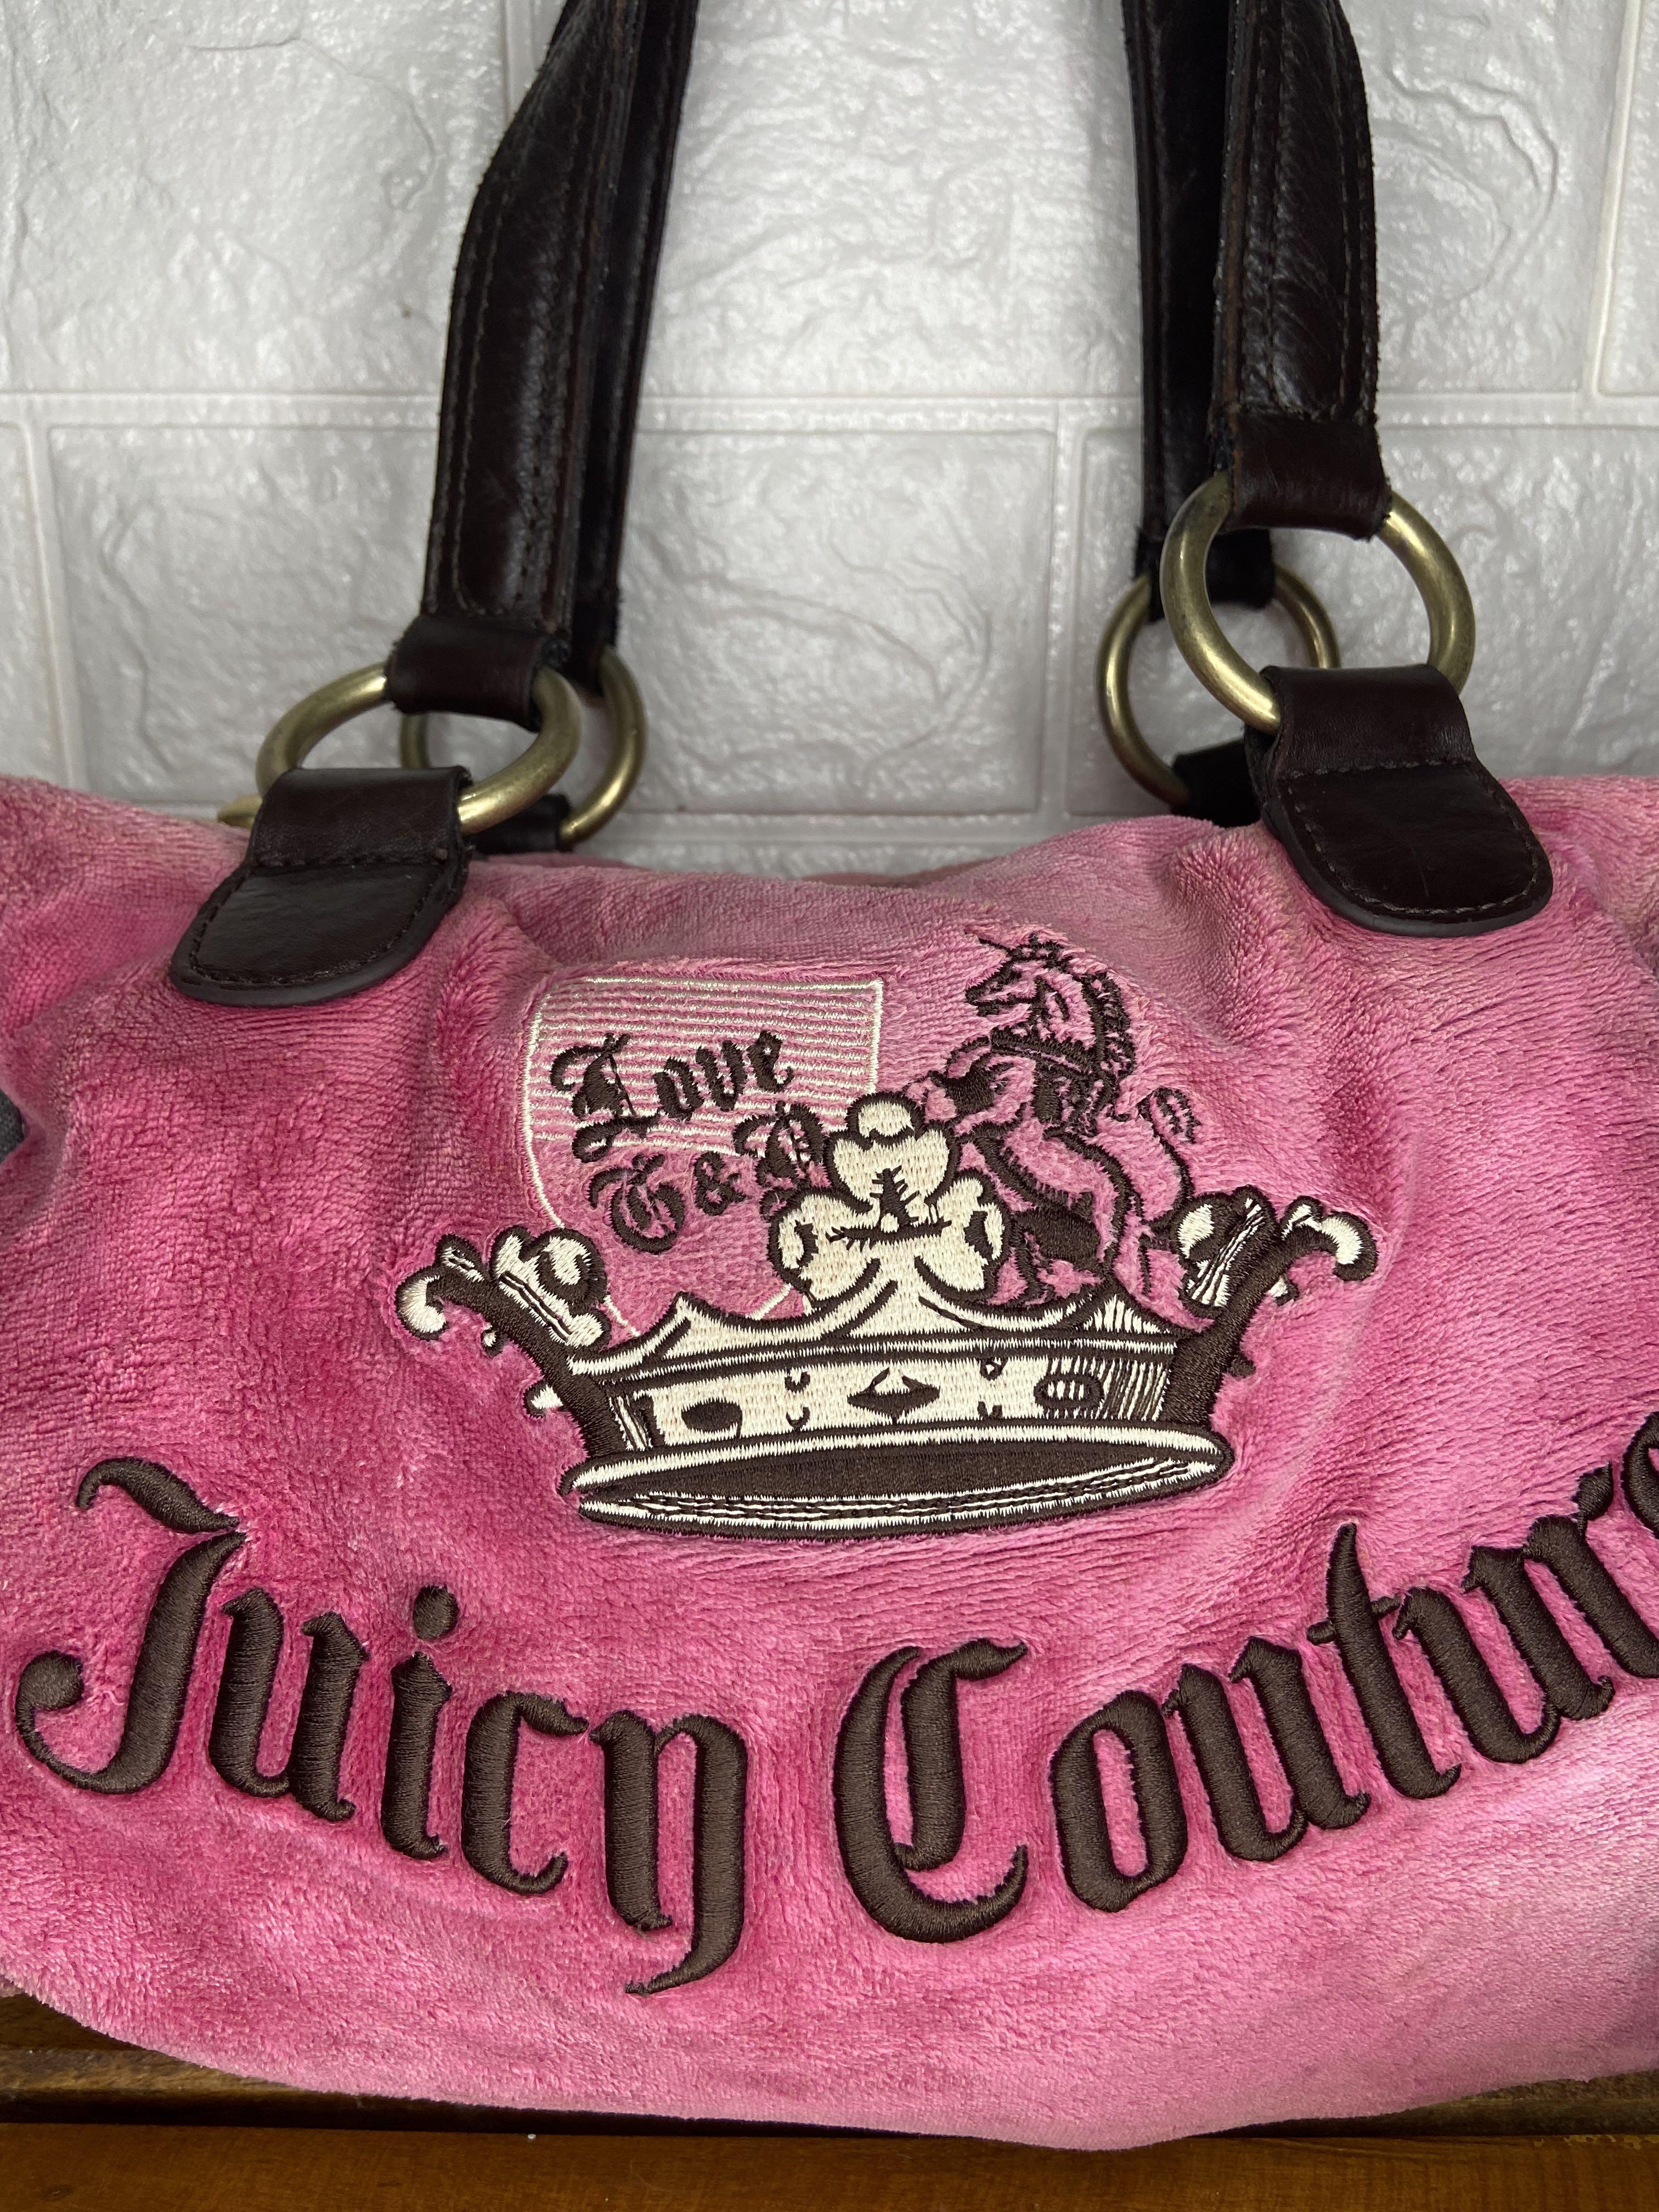 FMGEM - Create & Share Commercial Free YouTube Playlists | Bags, Juicy  couture handbags, Juicy couture bags